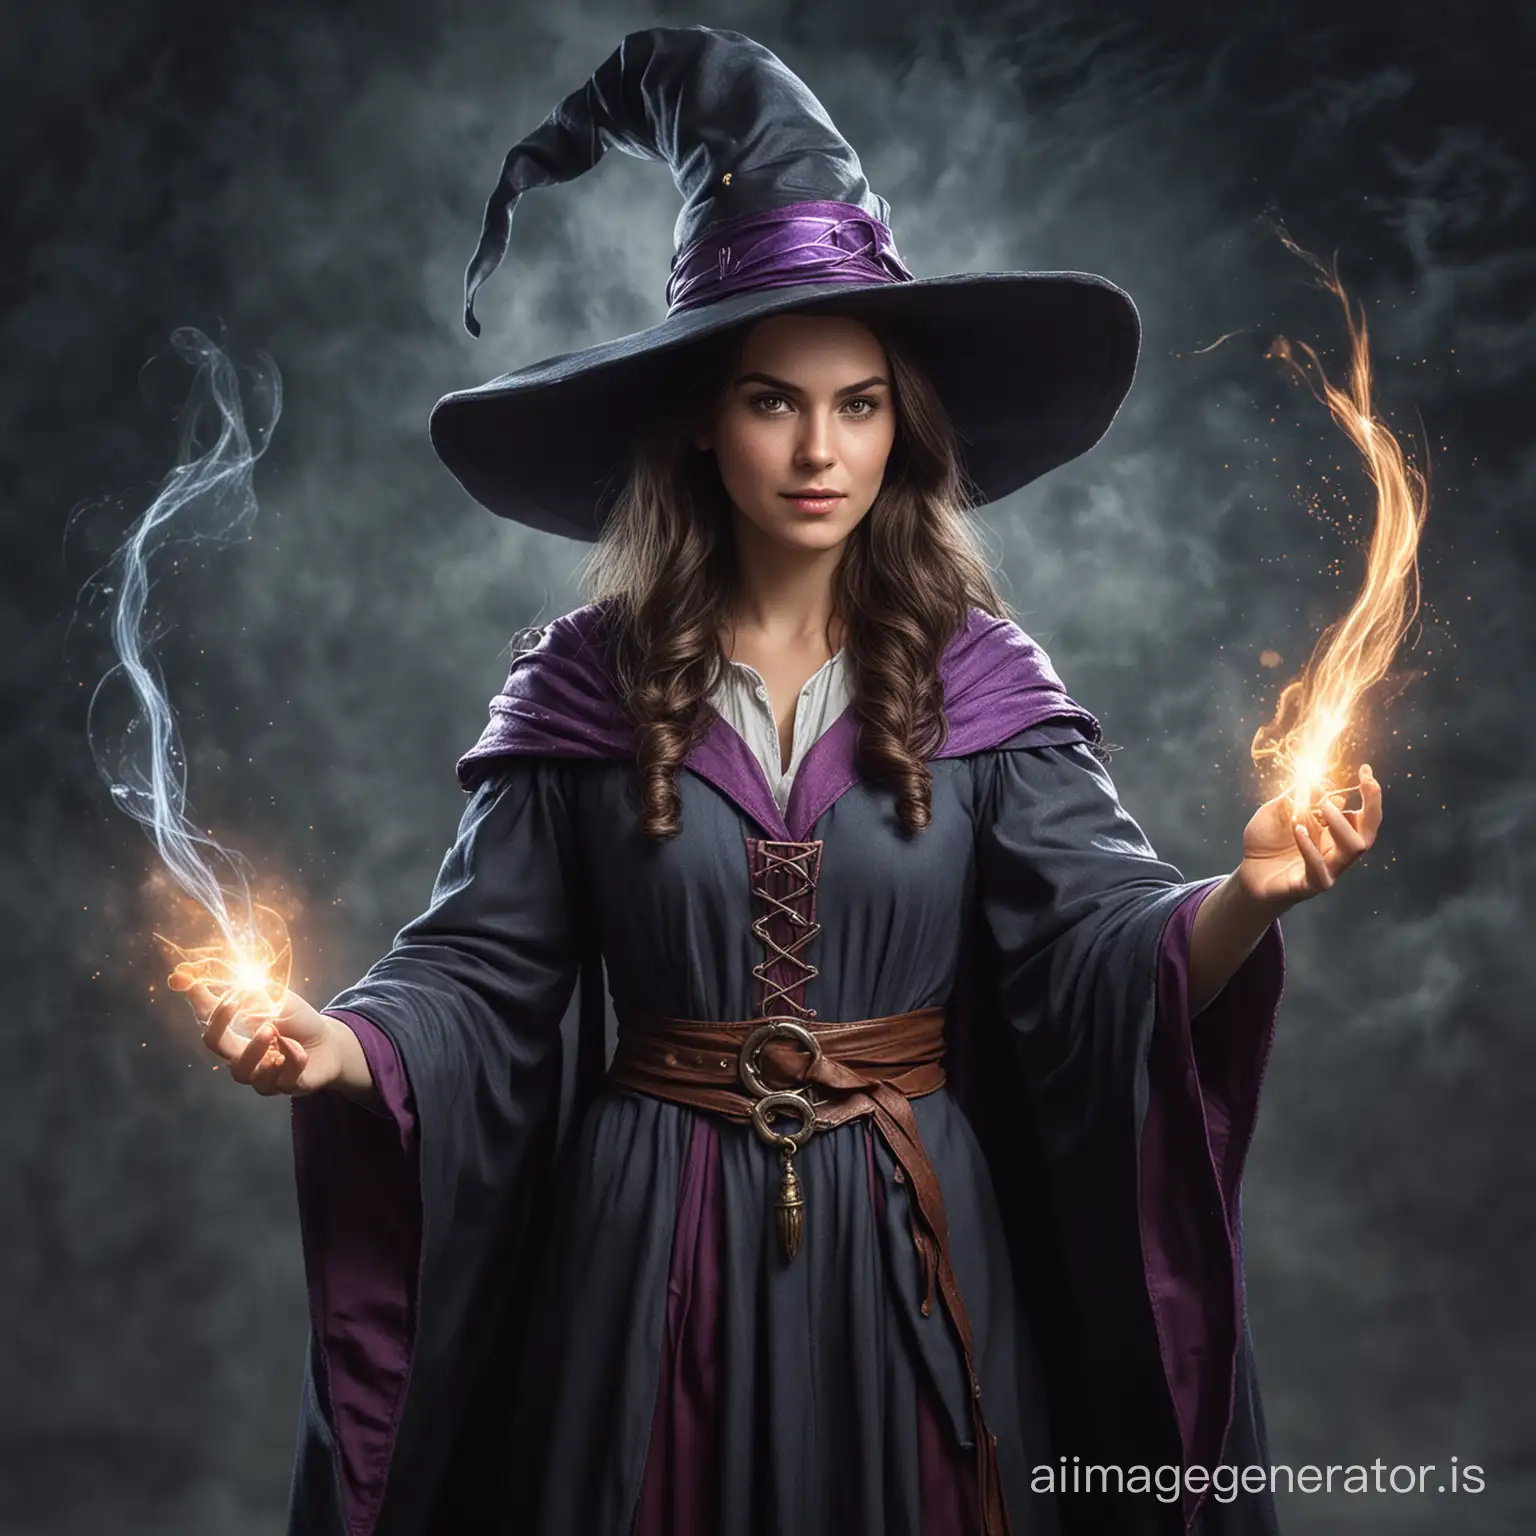 Enchanting-Female-Wizard-Casting-Spells-in-Mystical-Forest